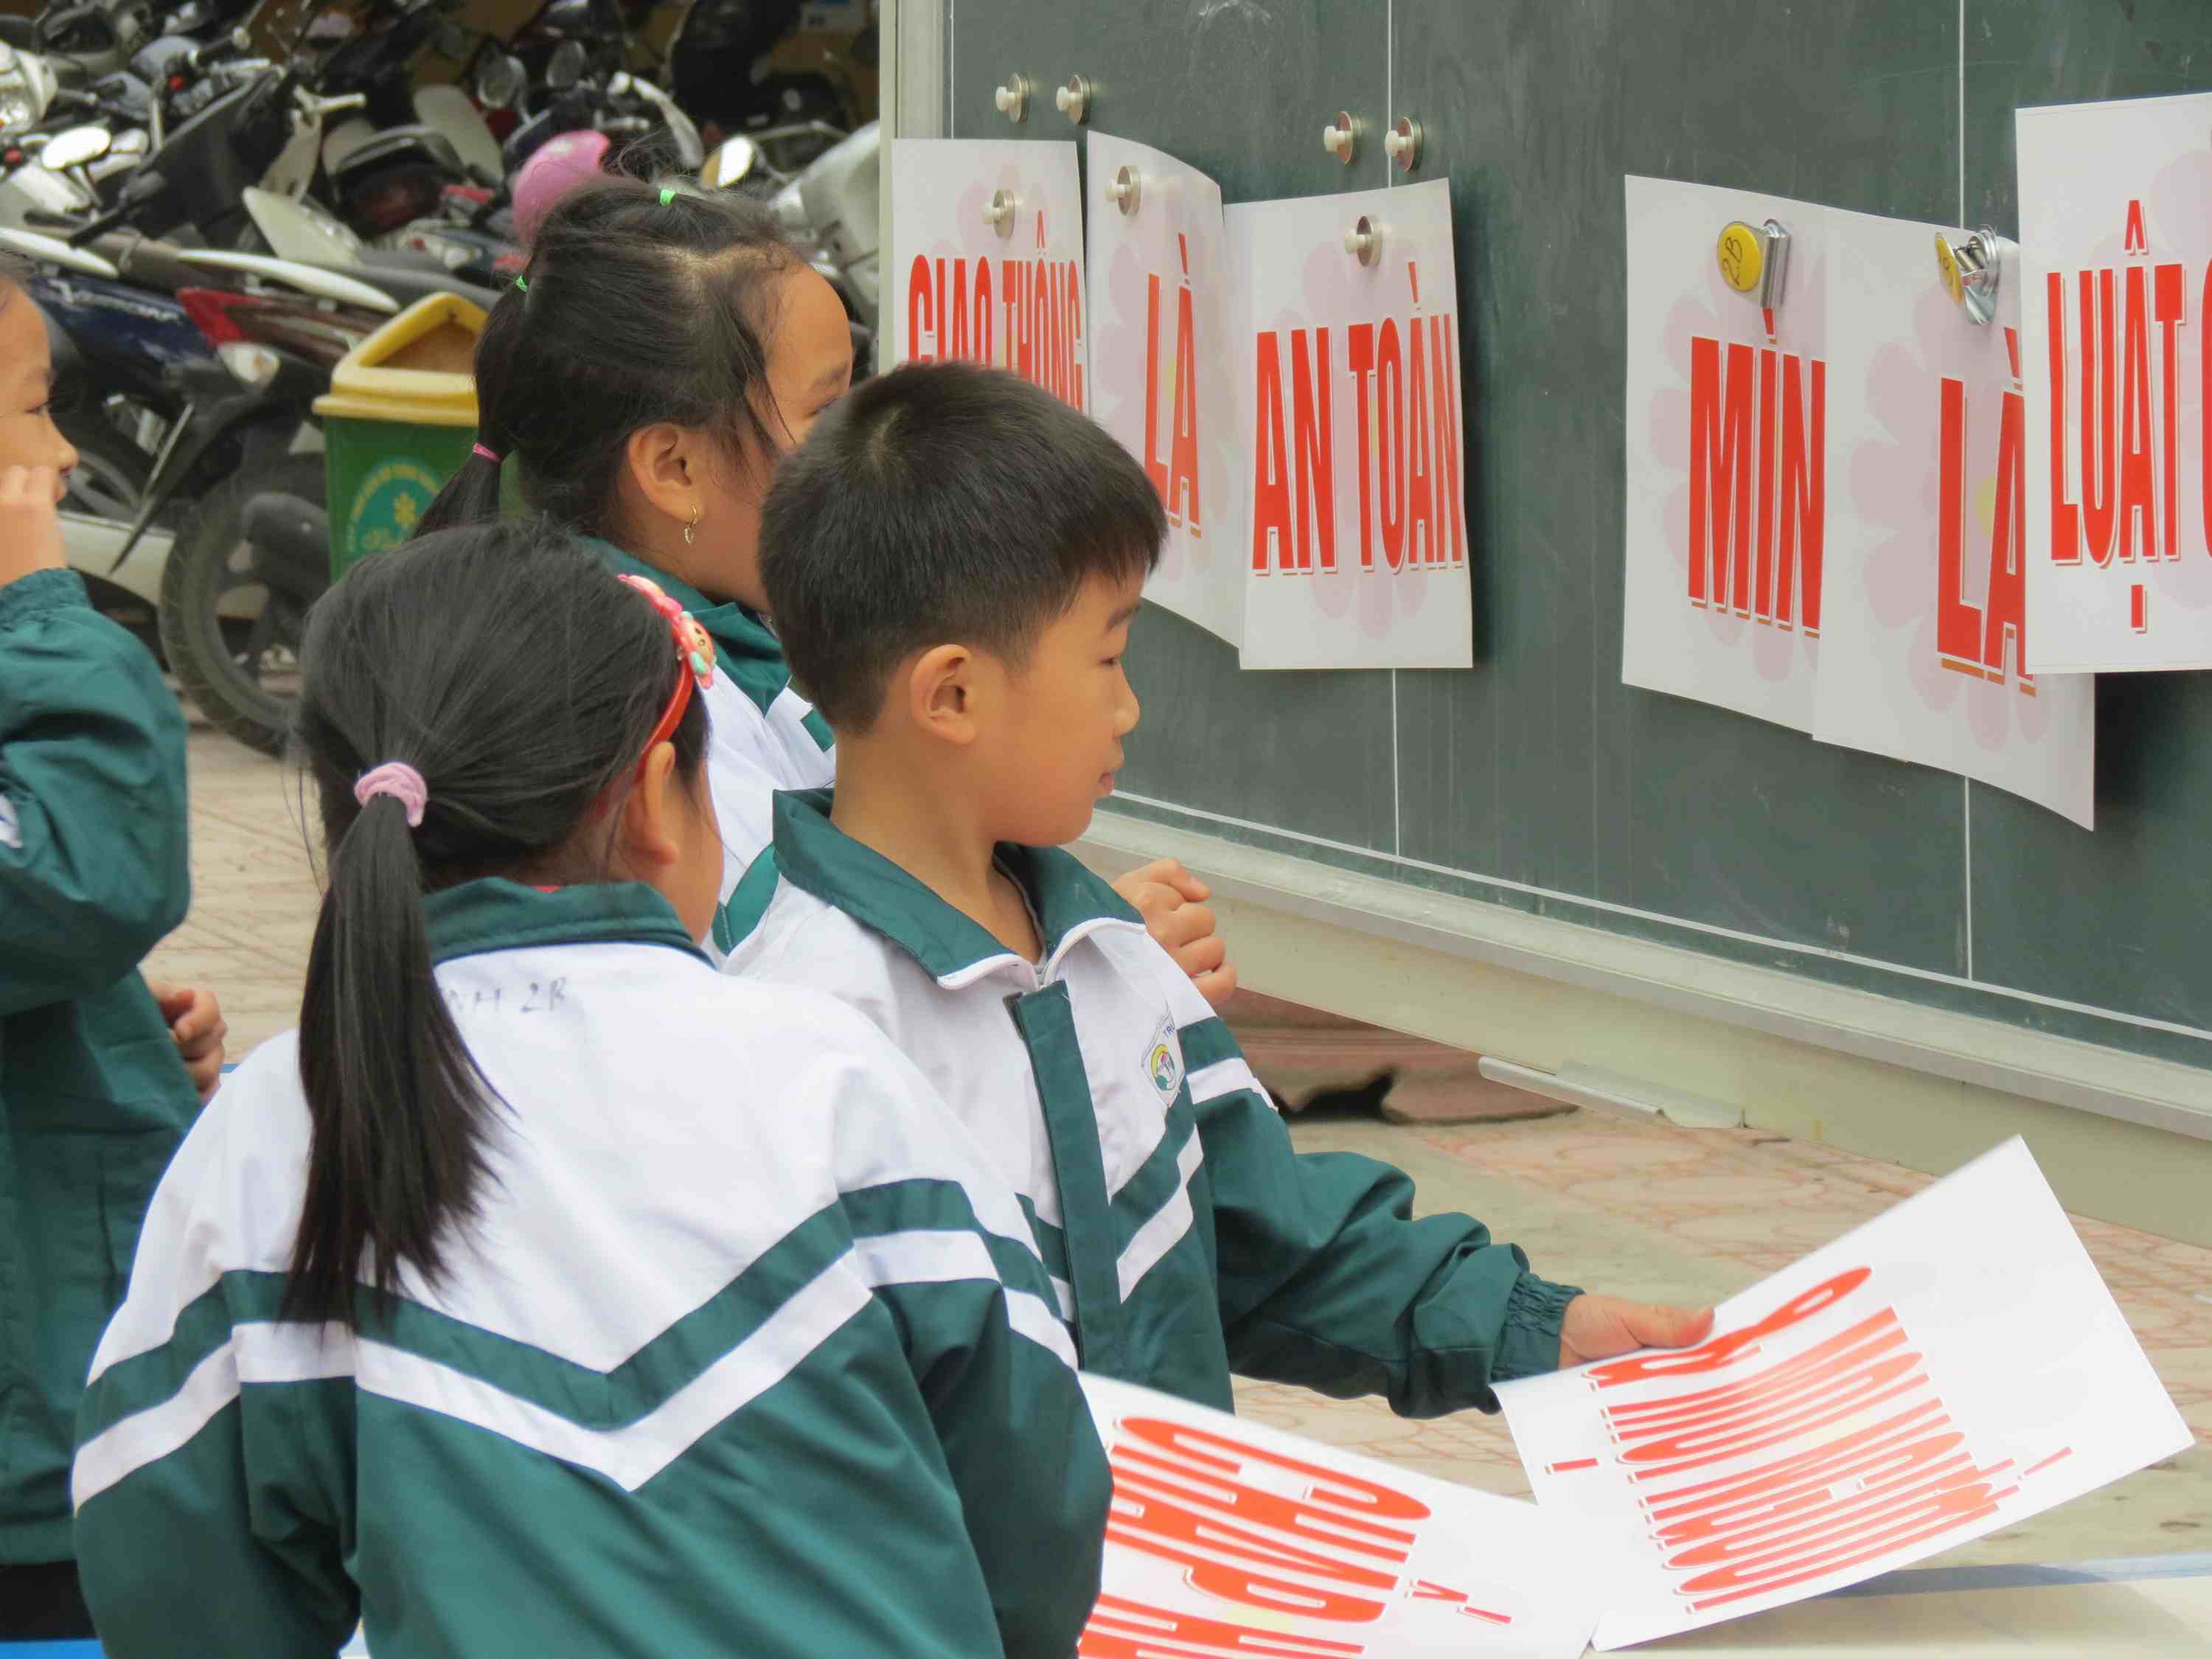 Students at Ai Quoc Primary School play a traffic safety matching game illustrating key road safety messages